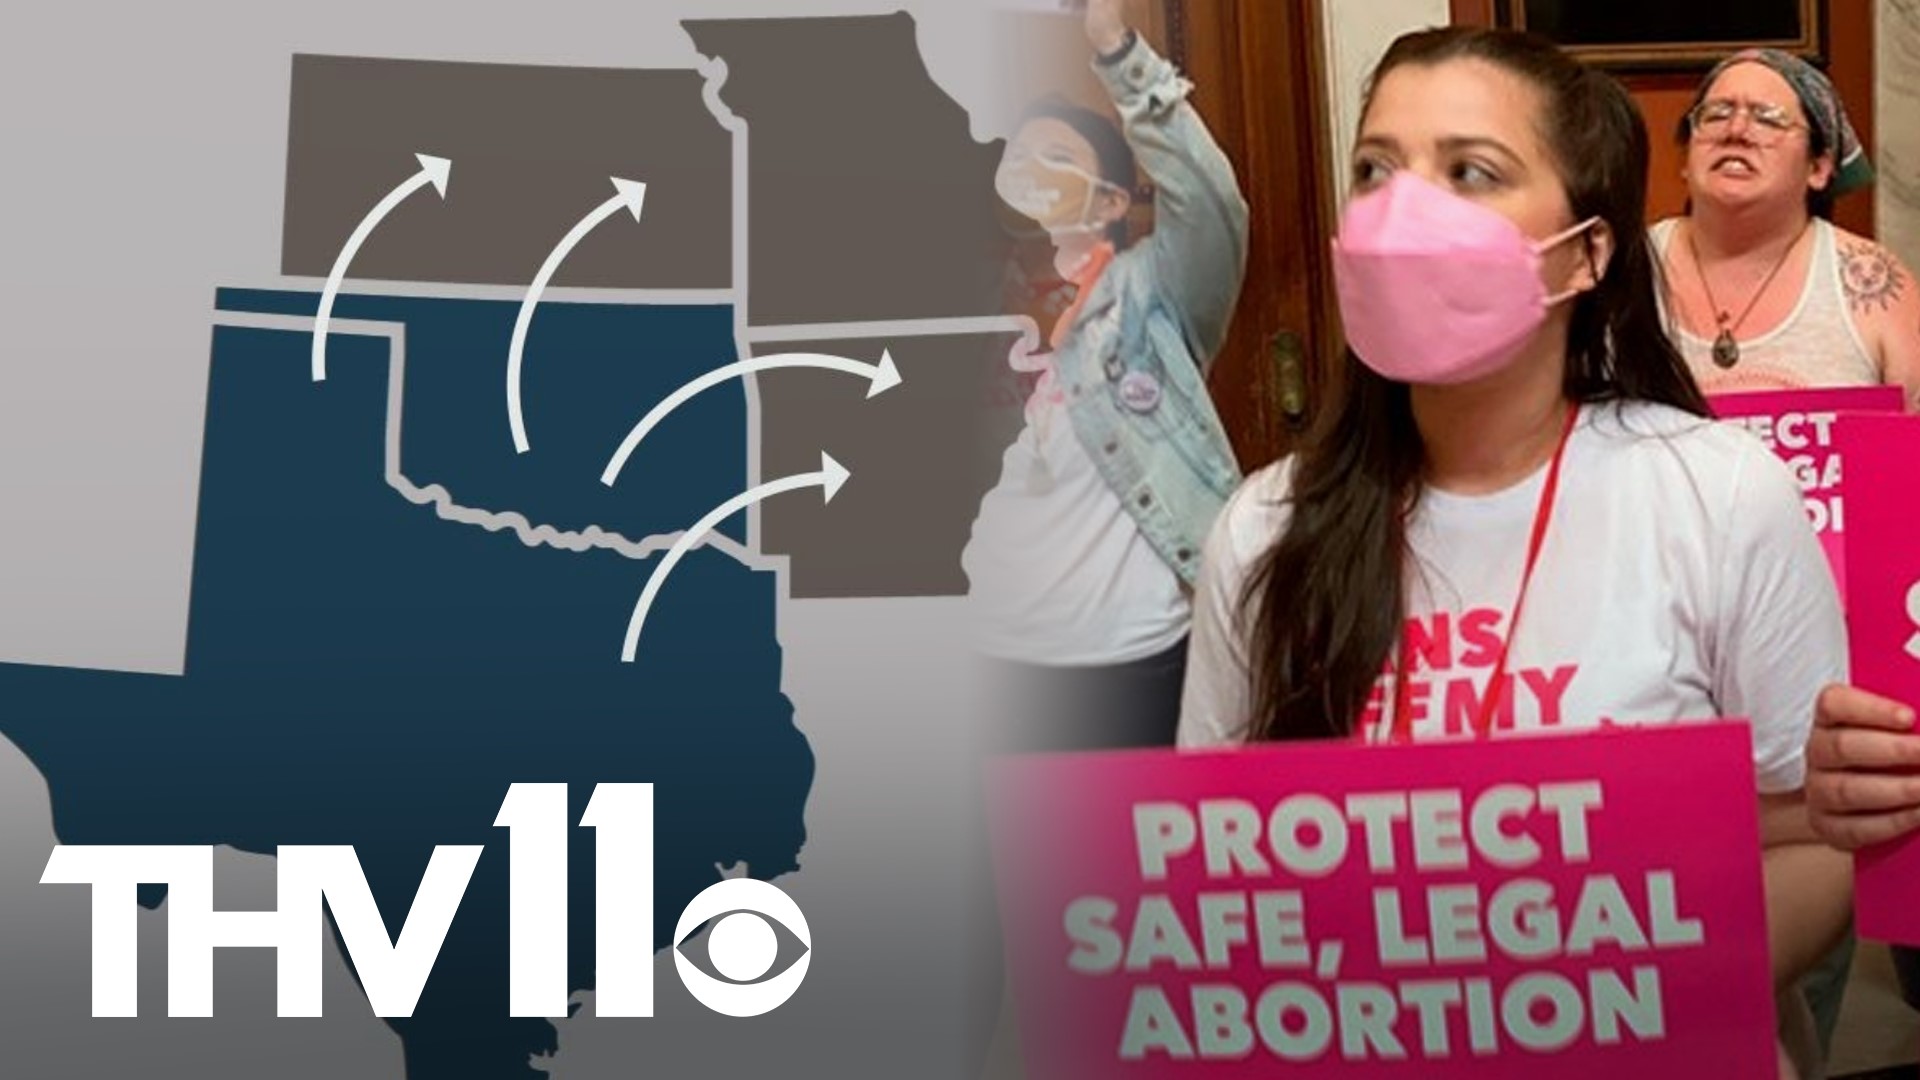 Arkansas abortion providers are preparing for a surge of procedures this summer as people may come from neighbors states after bans in Texas and Oklahoma.